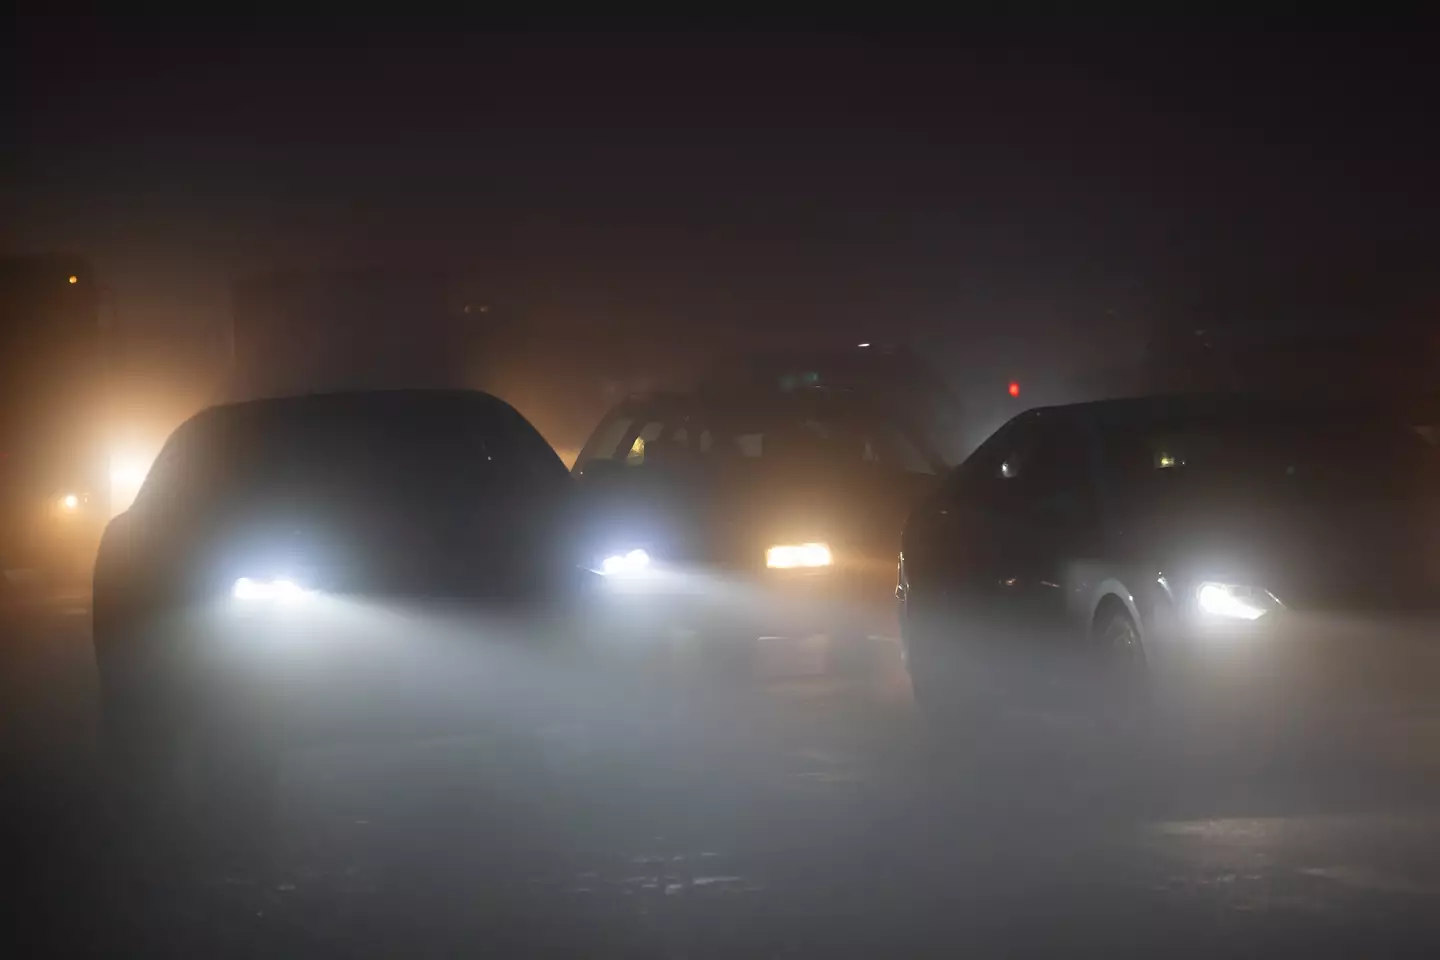 Remember to only rely on your fog lights when you really need them.